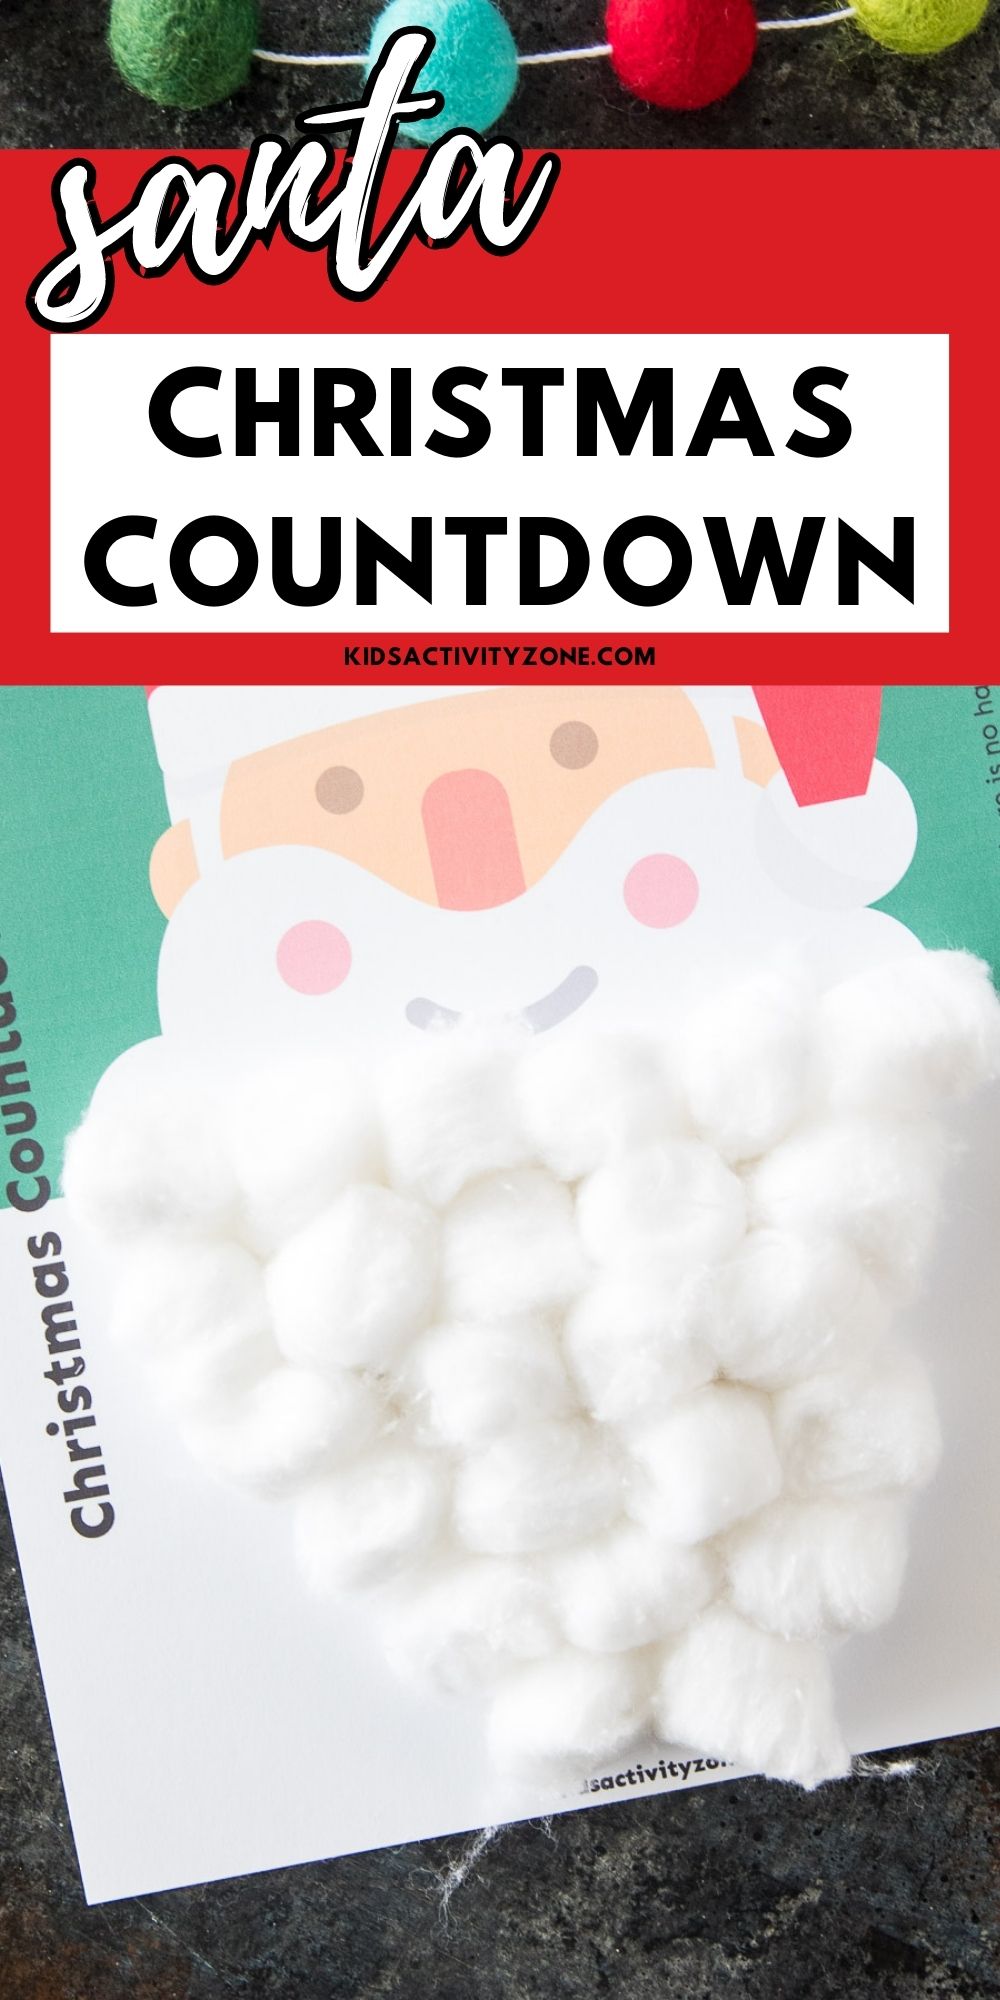 Santa Christmas Countdown is so easy! This printable Christmas Countdown is festive and cute. Simply apply a cotton ball with glue to each day of the month to form Santa's beard. On the 24th day you have a complete beard for Santa and tomorrow's Christmas!